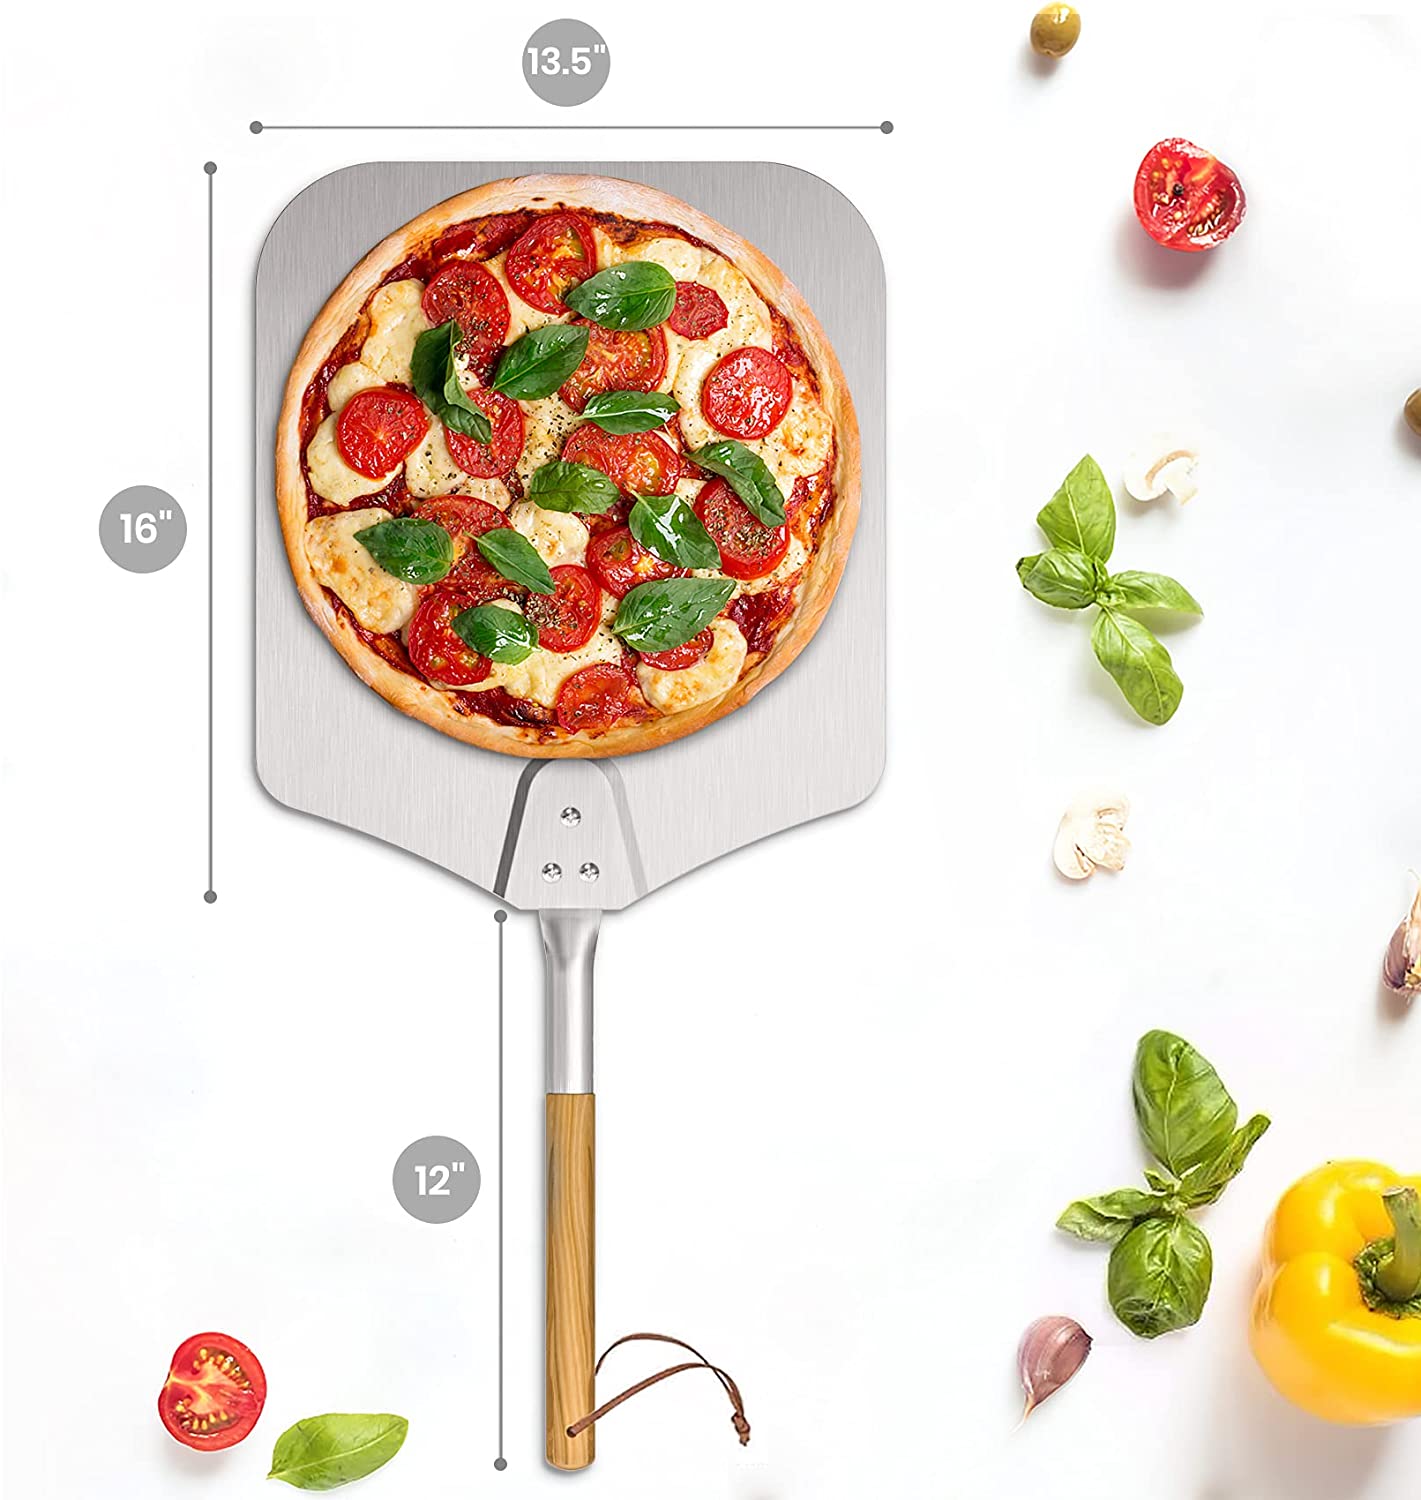 Onlyfire Large Aluminum Pizza Peel, with Wooden Handle, 13.5" x 16" for Baking Handmade Pizza, 28" Overall, for Any Outdoor Or Indoor Pizza Grill Oven. - e4cents